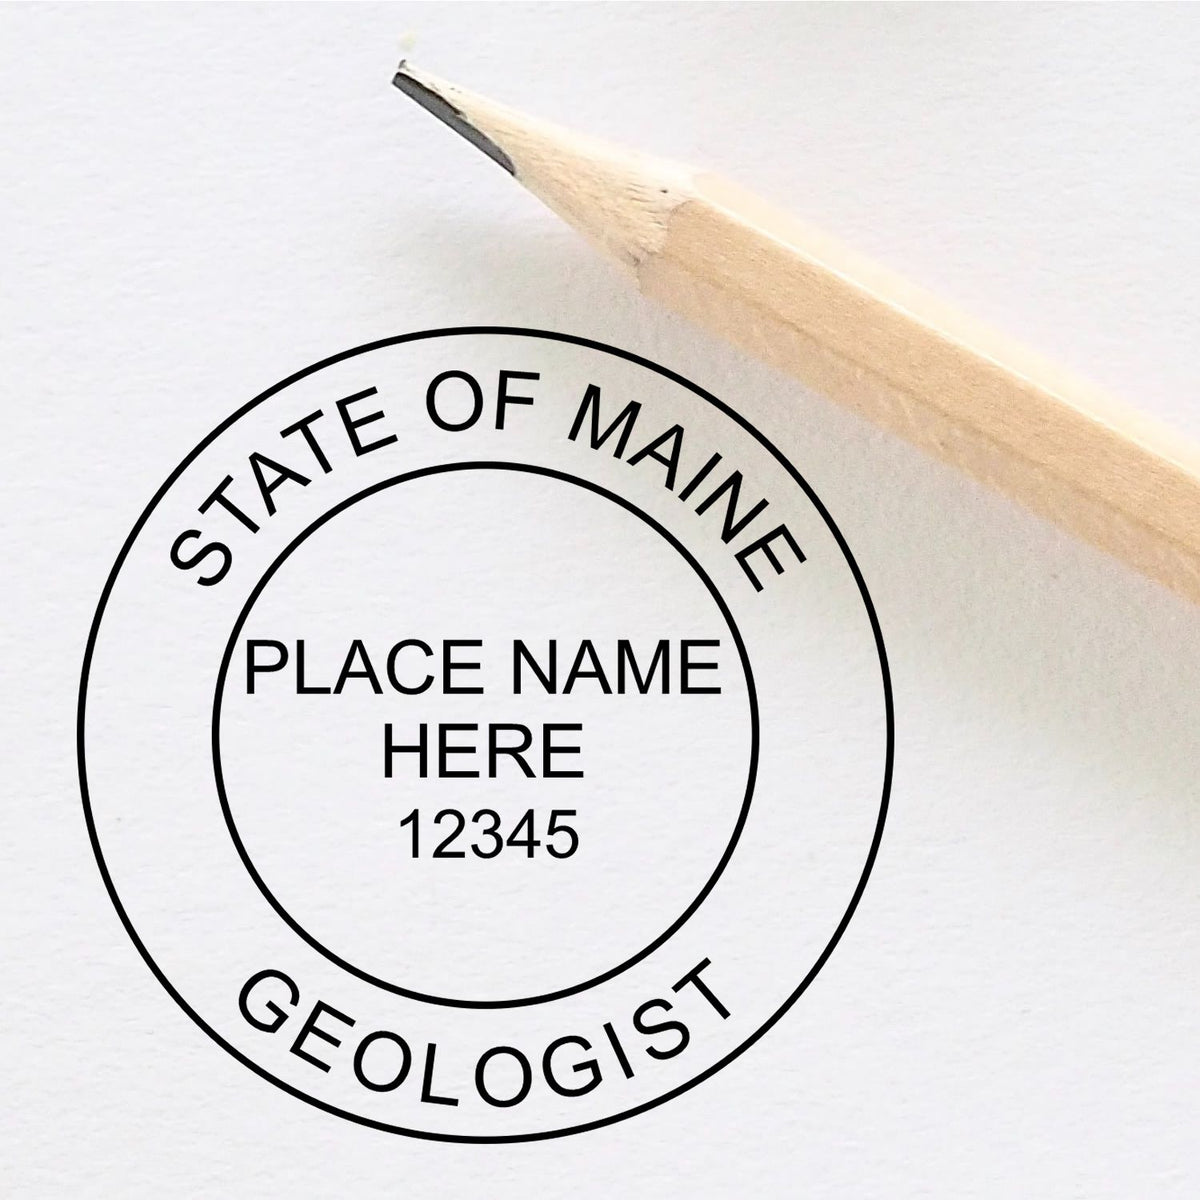 A lifestyle photo showing a stamped image of the Self-Inking Maine Geologist Stamp on a piece of paper